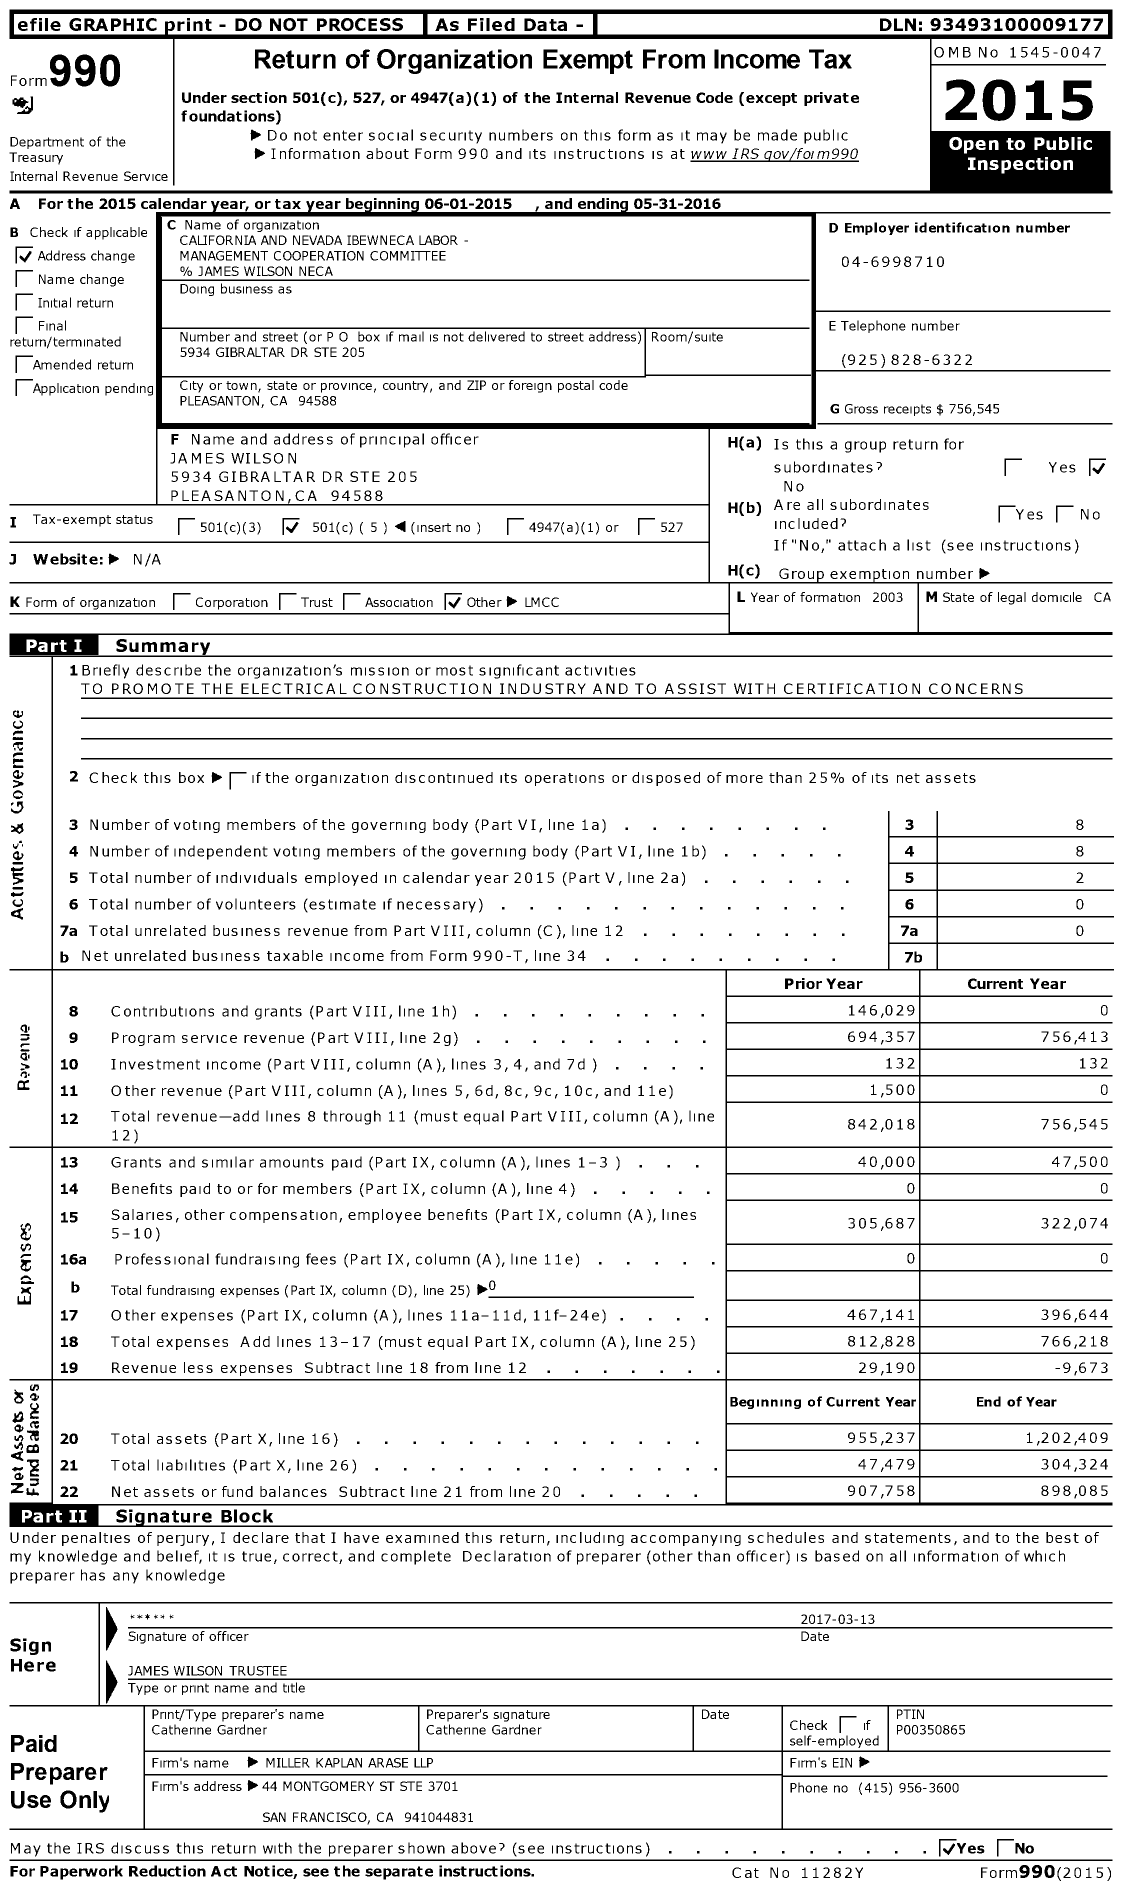 Image of first page of 2015 Form 990O for California and Nevada Ibewneca Labor - Management Cooperation Committee